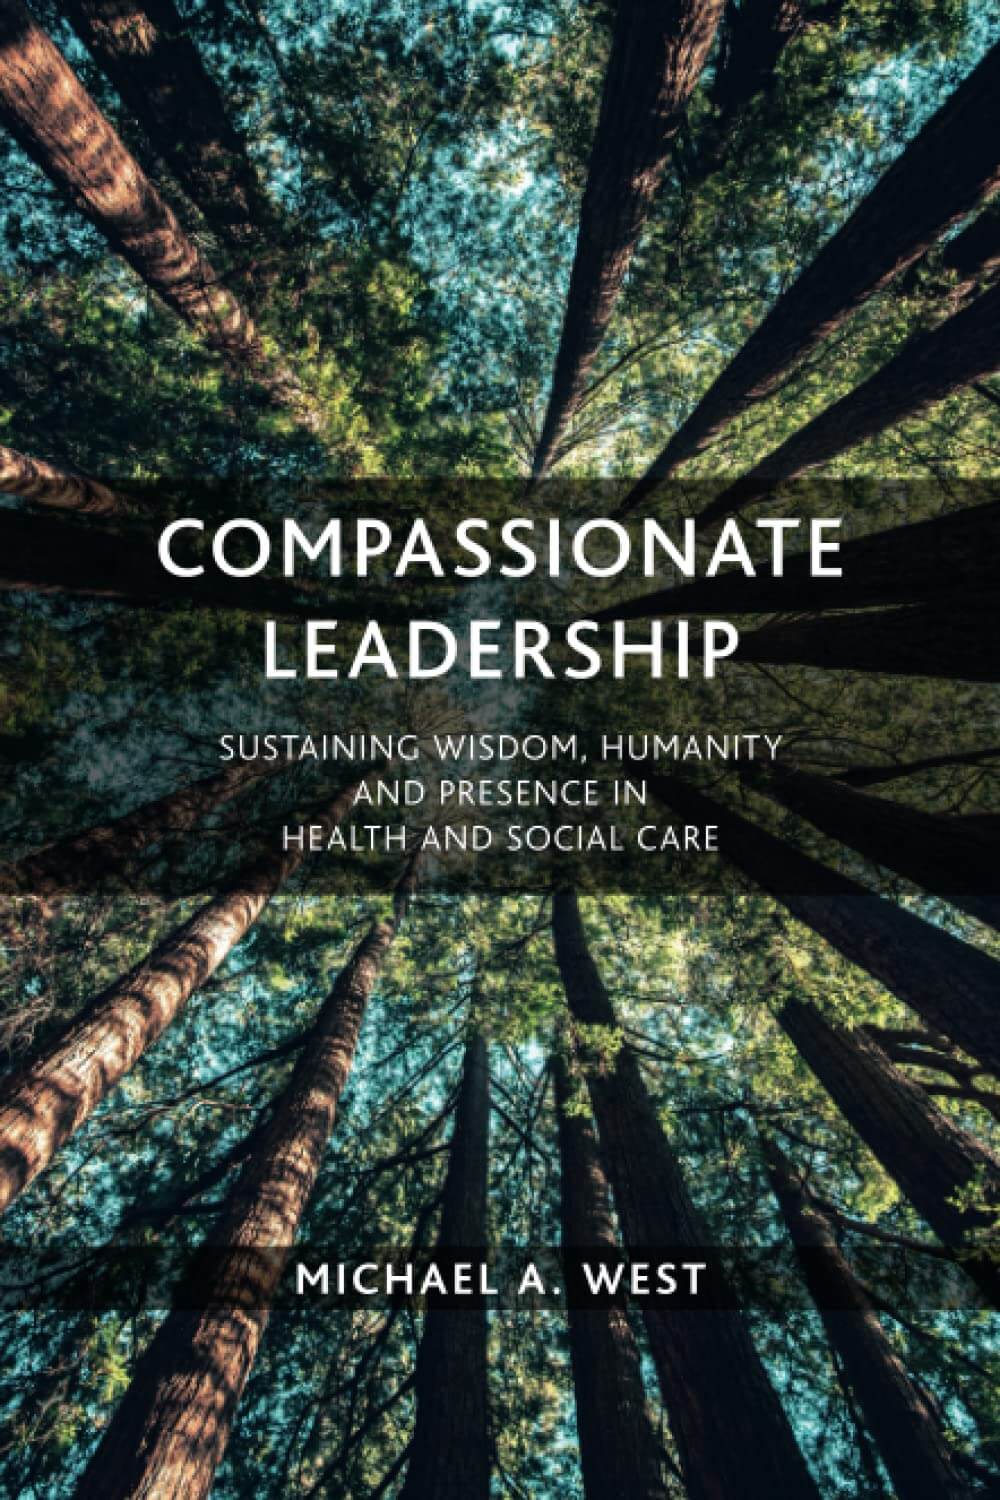 Compassionate Leadership: Sustaining Wisdom, Humanity and Presence in Health and Social Care